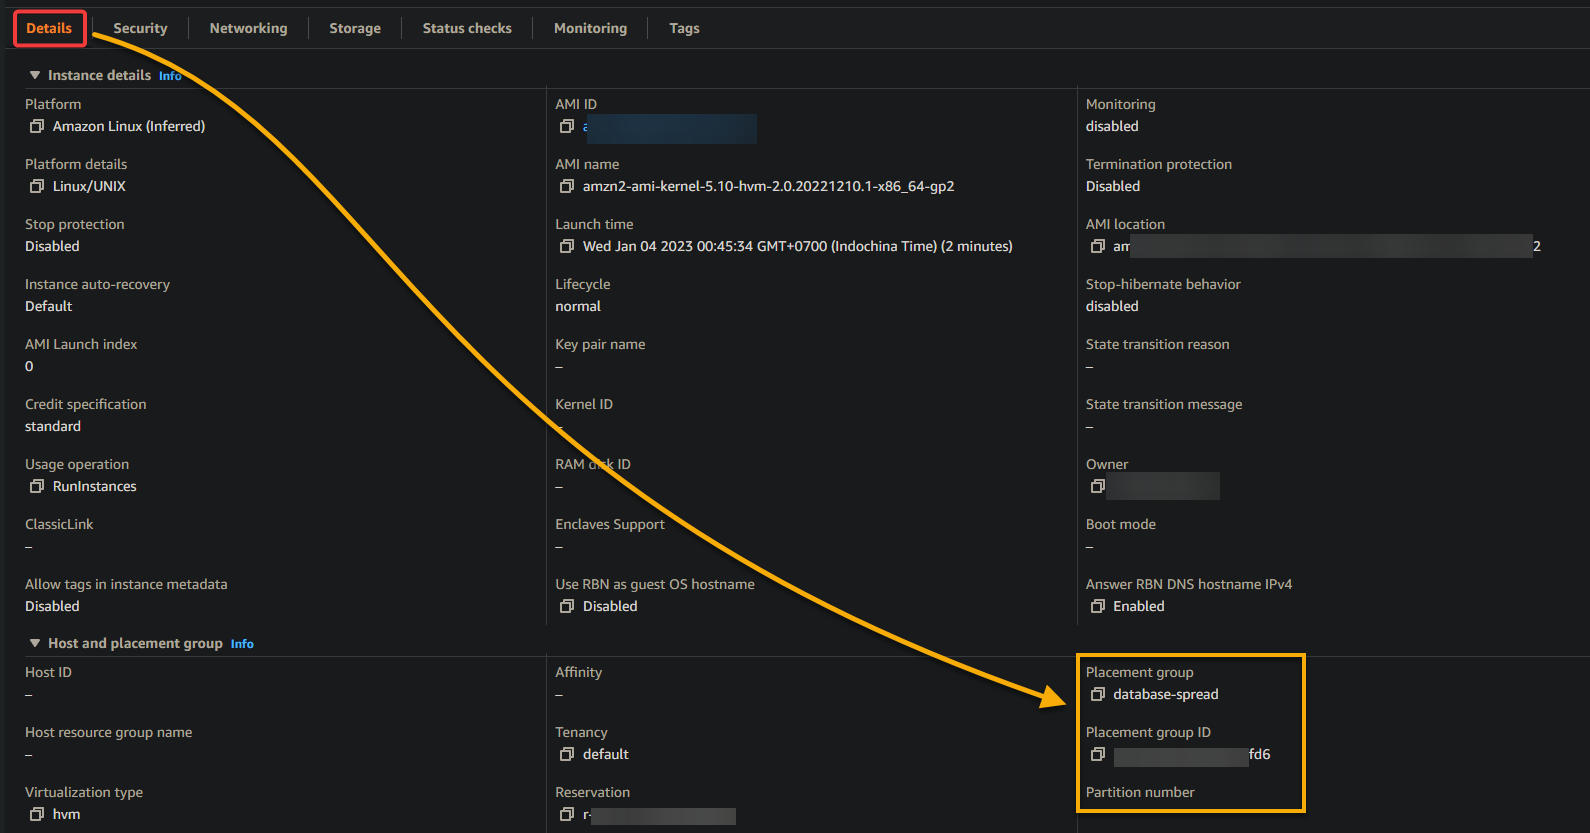 Viewing the newly-launched instance’s details